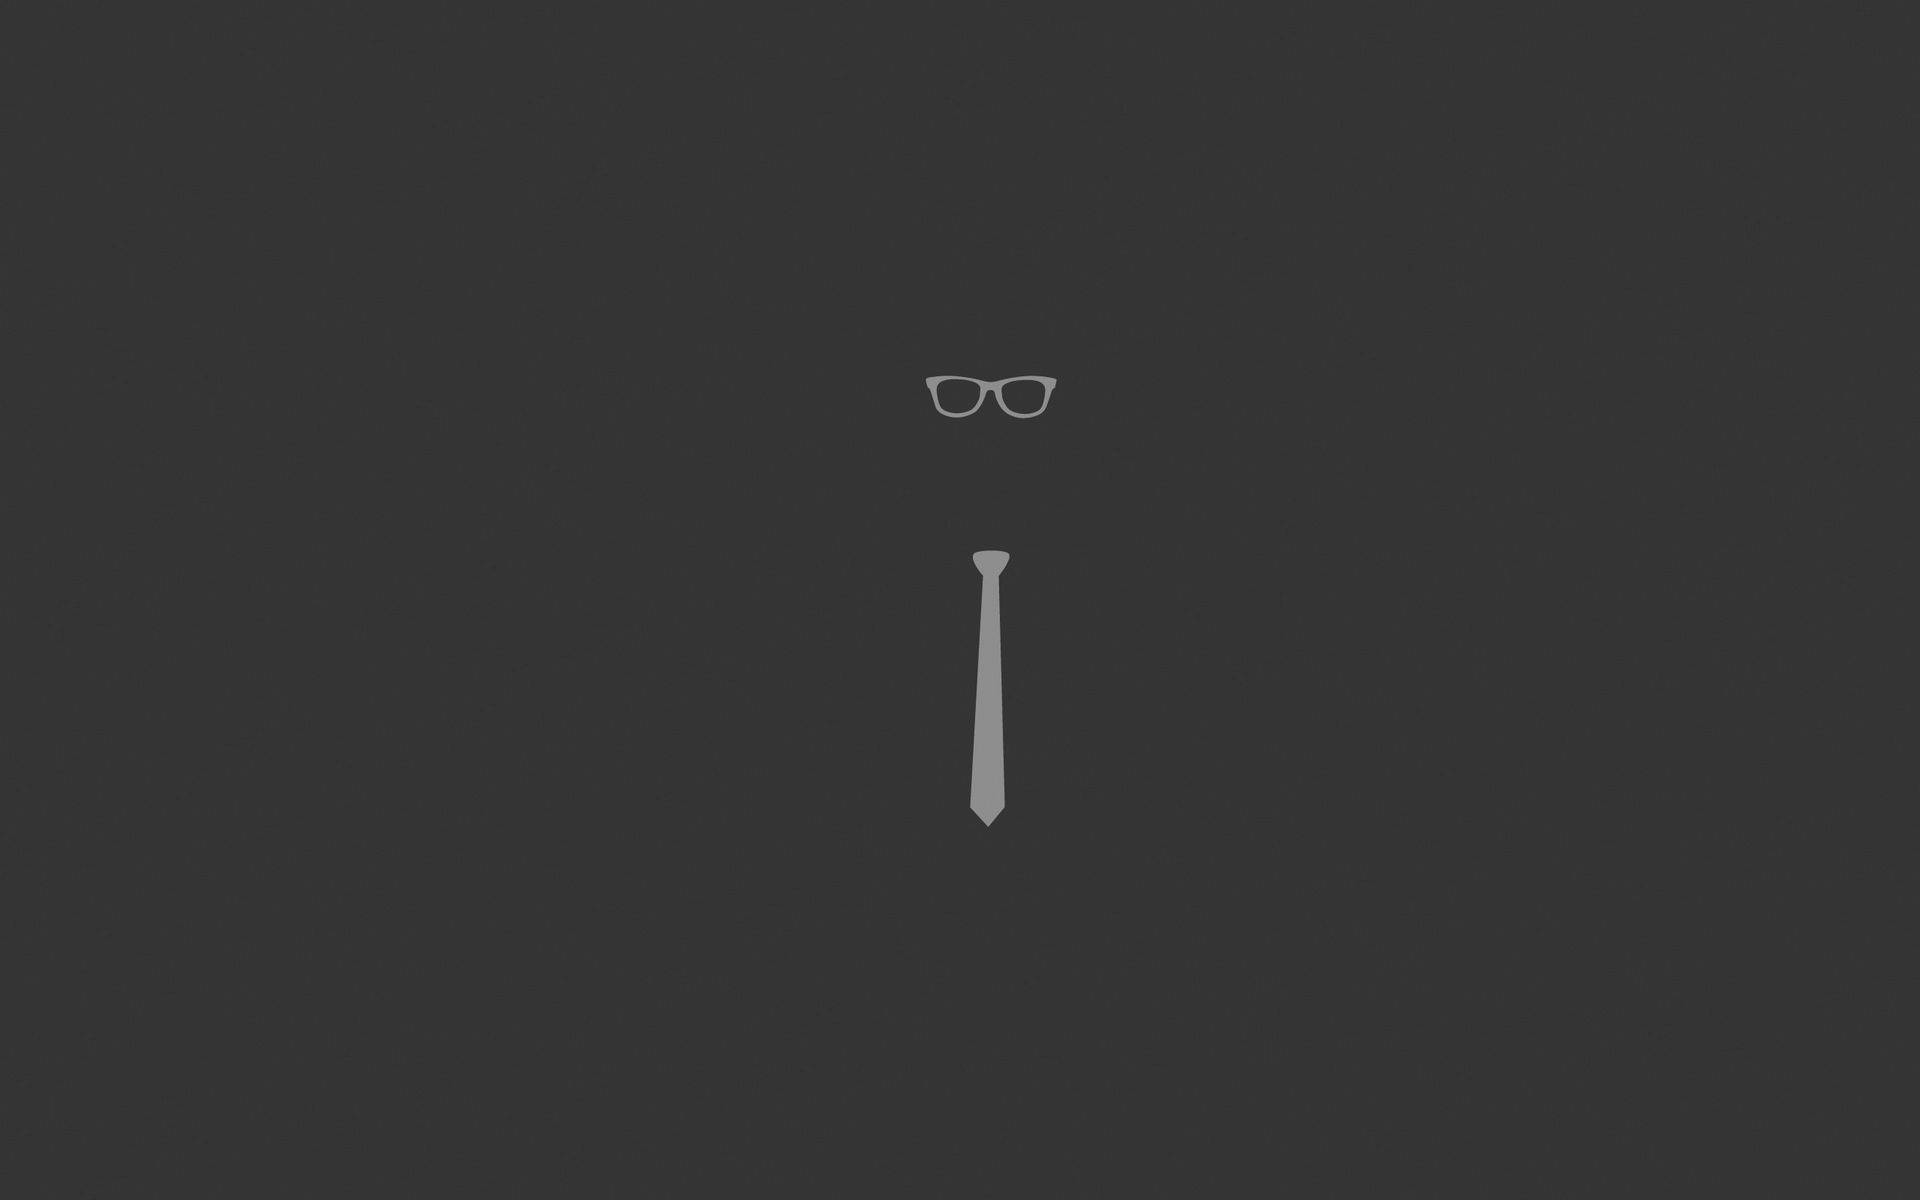 Minimalist Glasses And Tie Vector Background